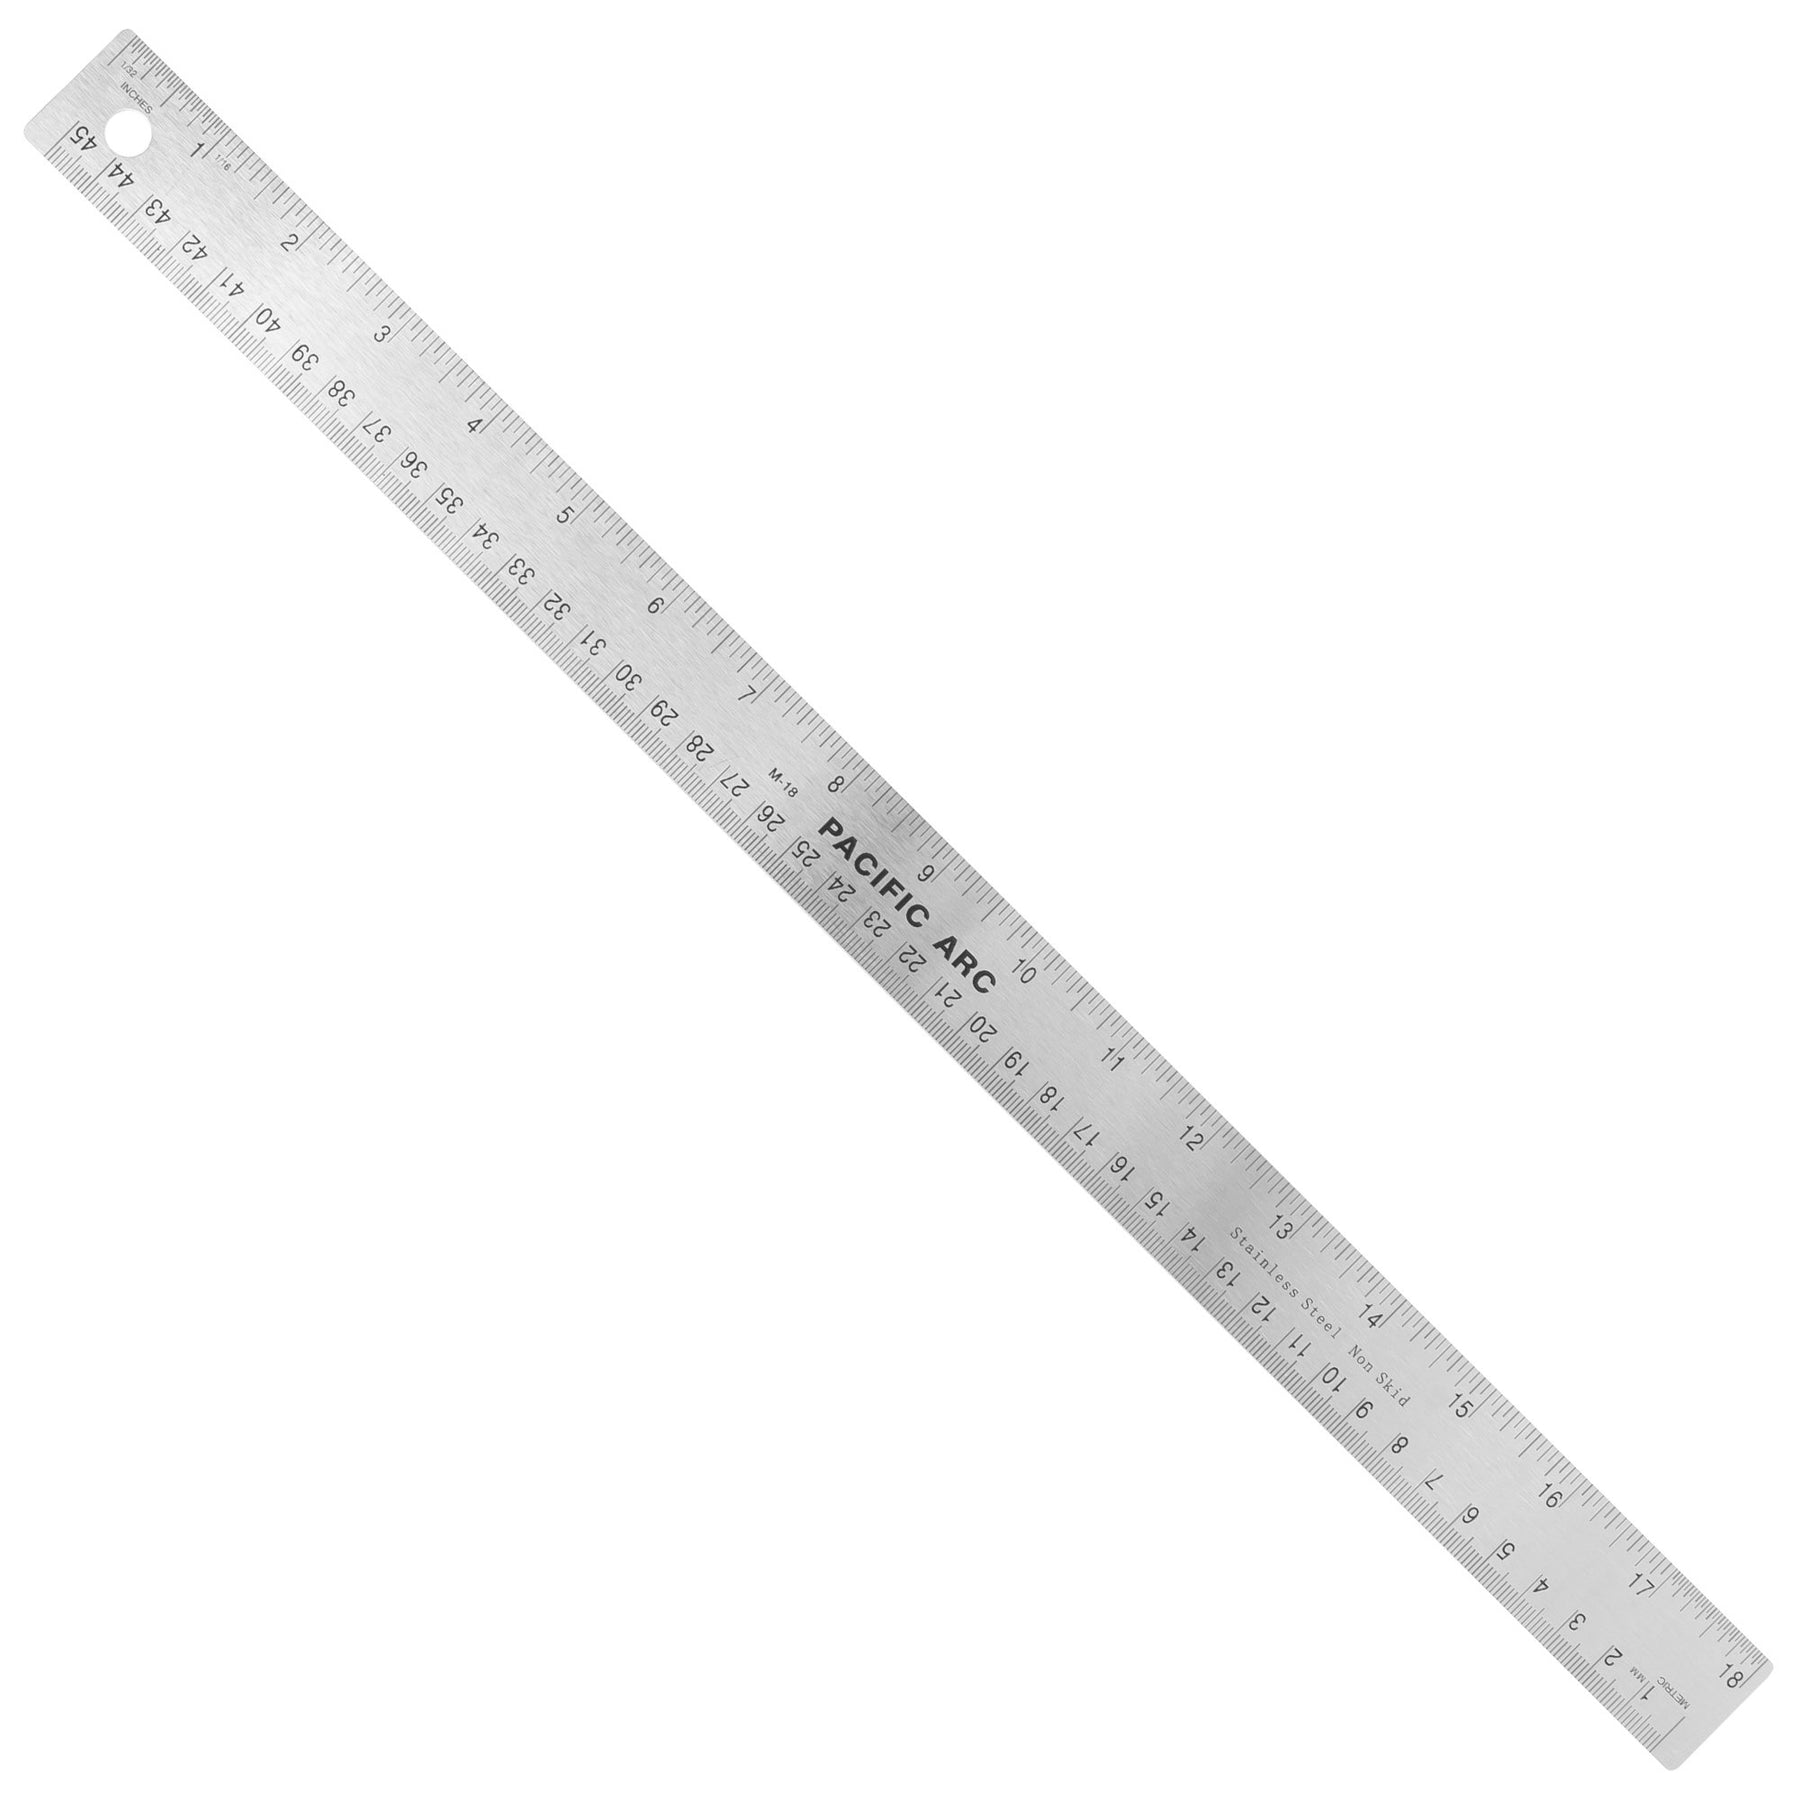 Acurit Stainless Steel Rulers Non-Slip Cork Backing